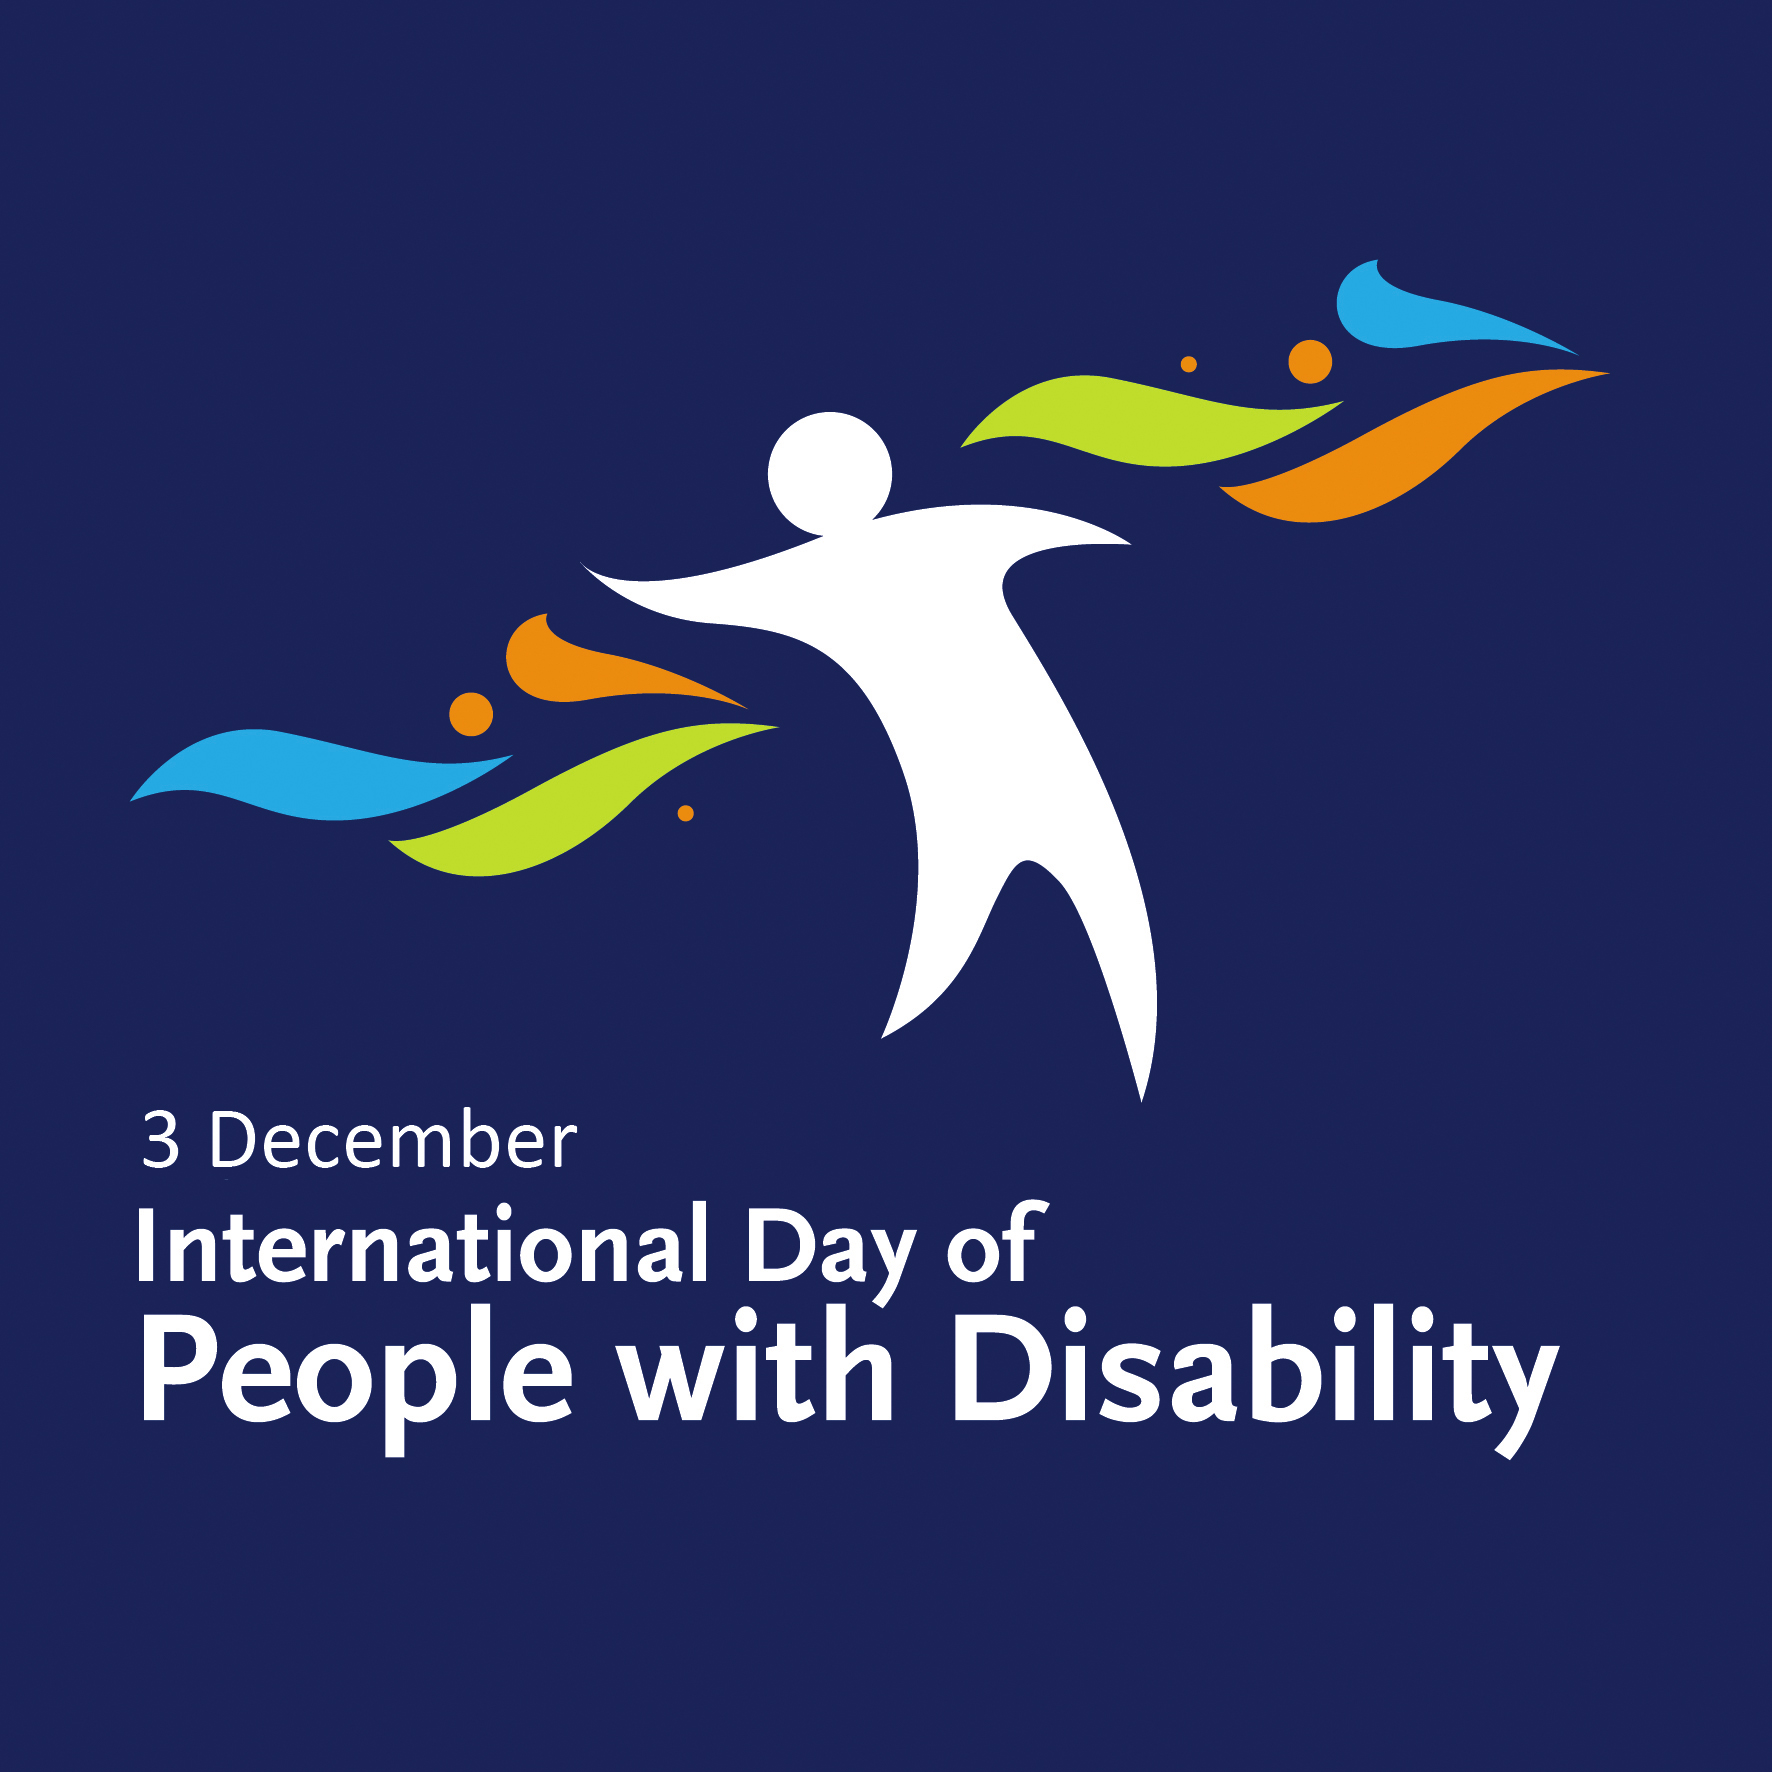 International Day of People with Disability logo